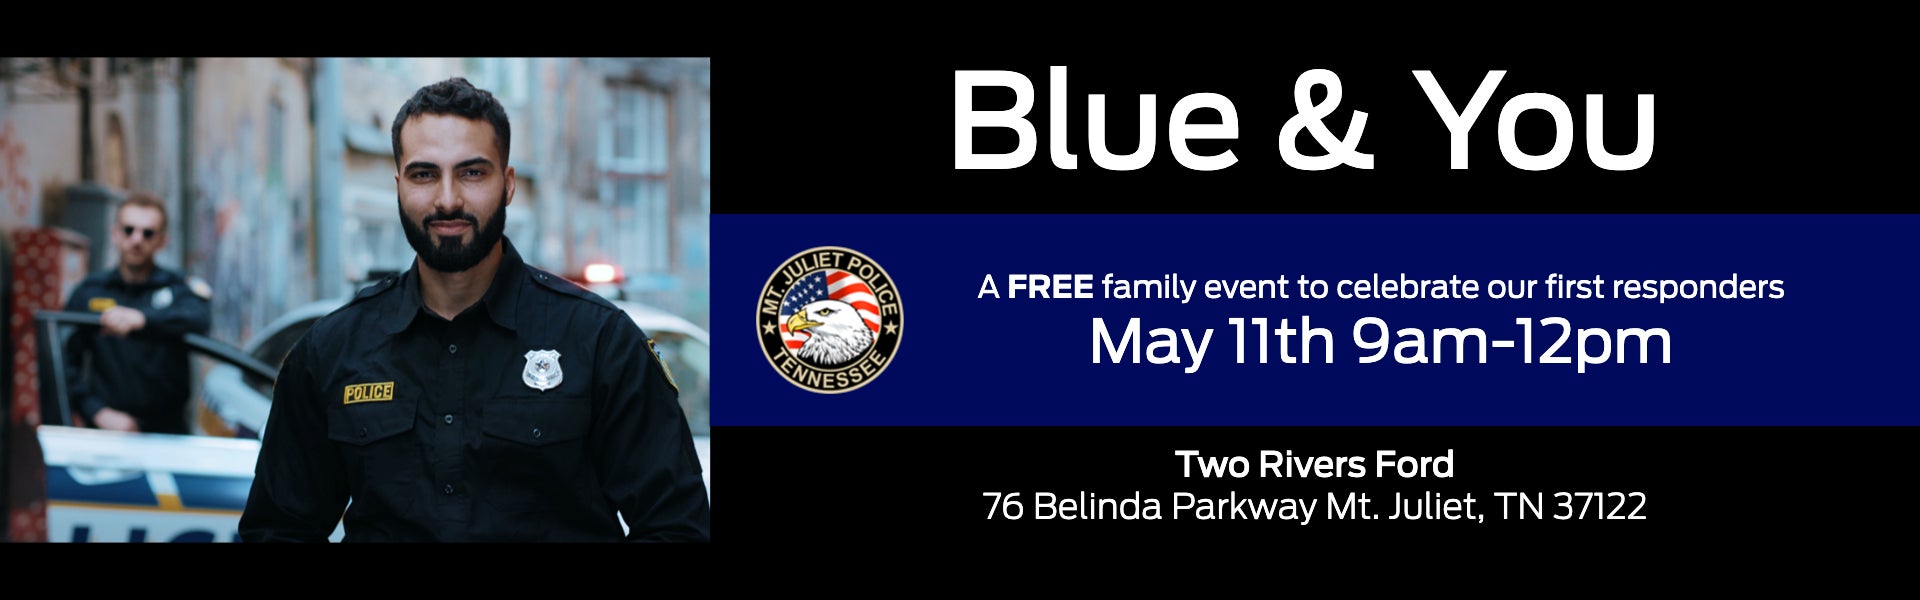 A FREE family event to celebrate our first responders May 11